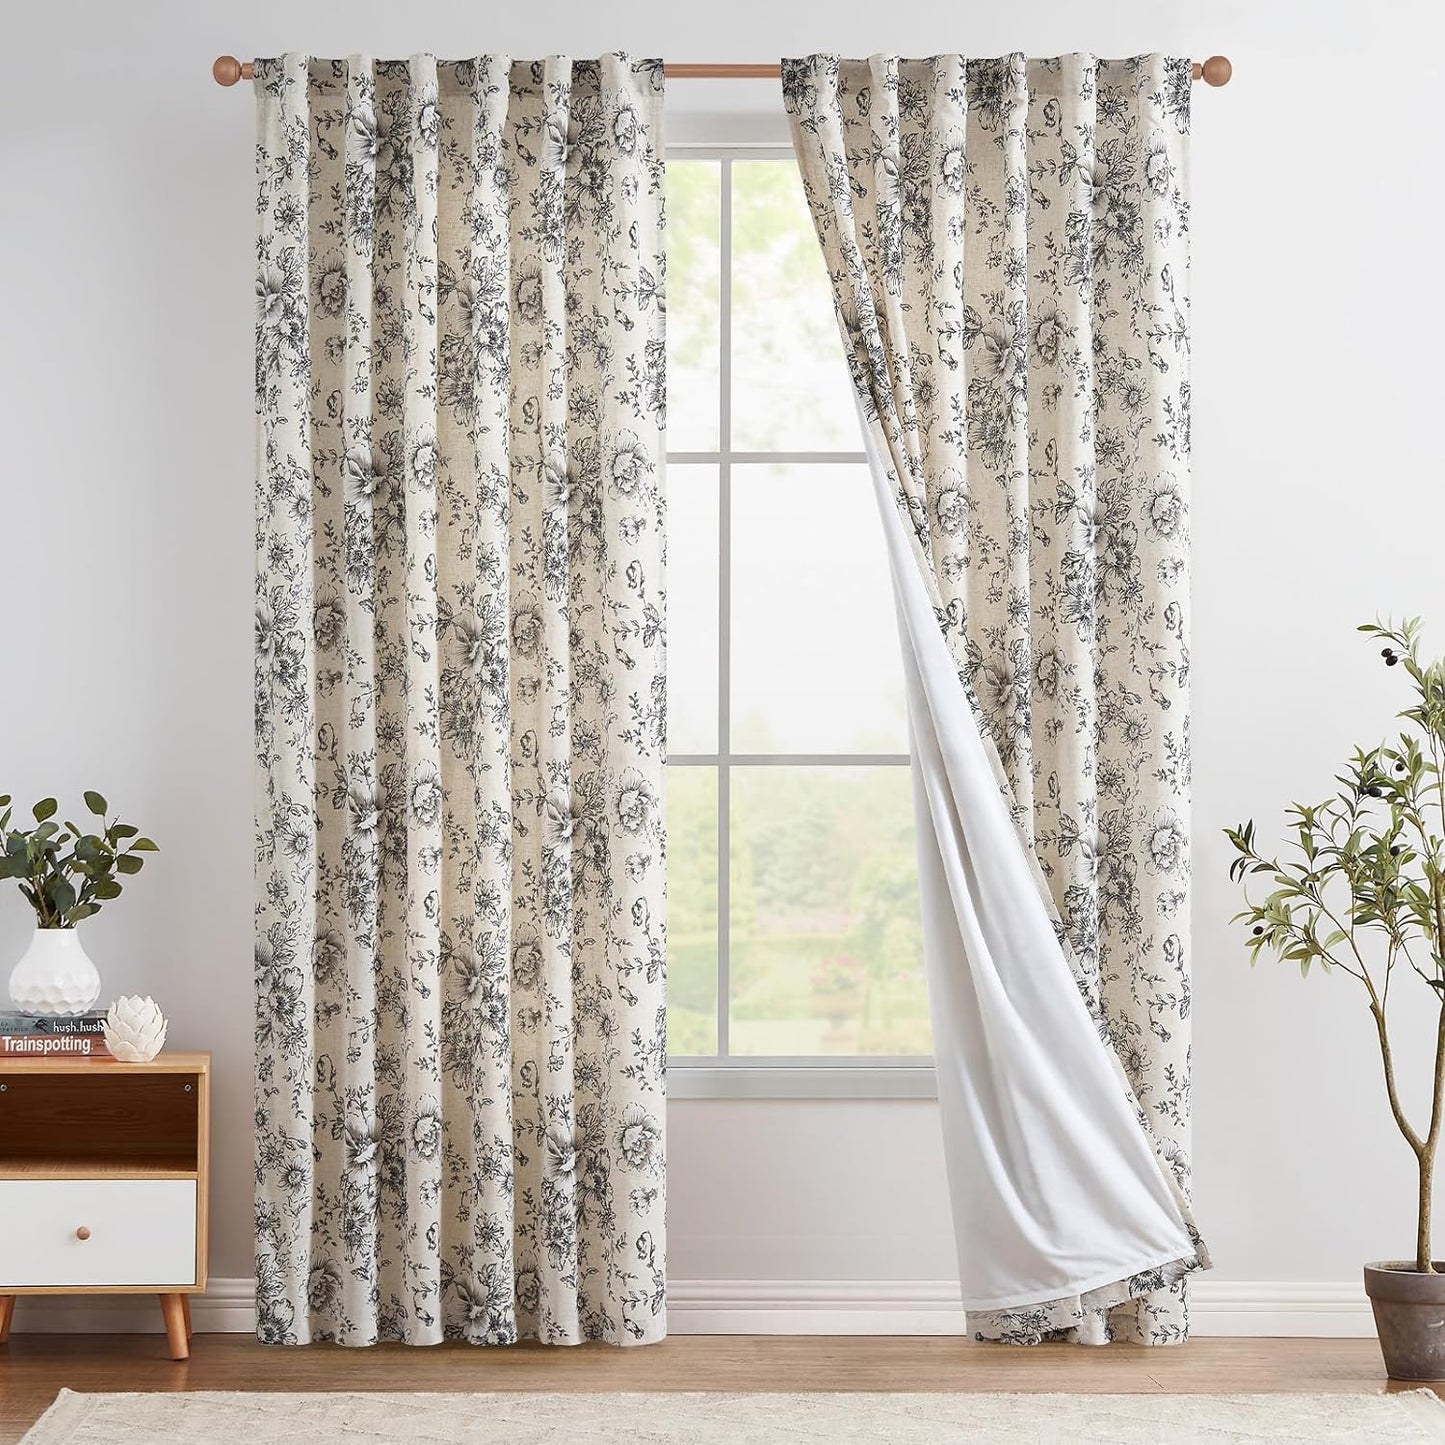 Jinchan Linen Curtains Floral Curtains for Living Room 84 Inch Length Black Printed Curtains Rod Pocket Back Tab Farmhouse Peony Flower Patterned Drapes Bedroom Window Curtain Set 2 Panels  CKNY HOME FASHION Lined Flower Black 50"W X 90"L 